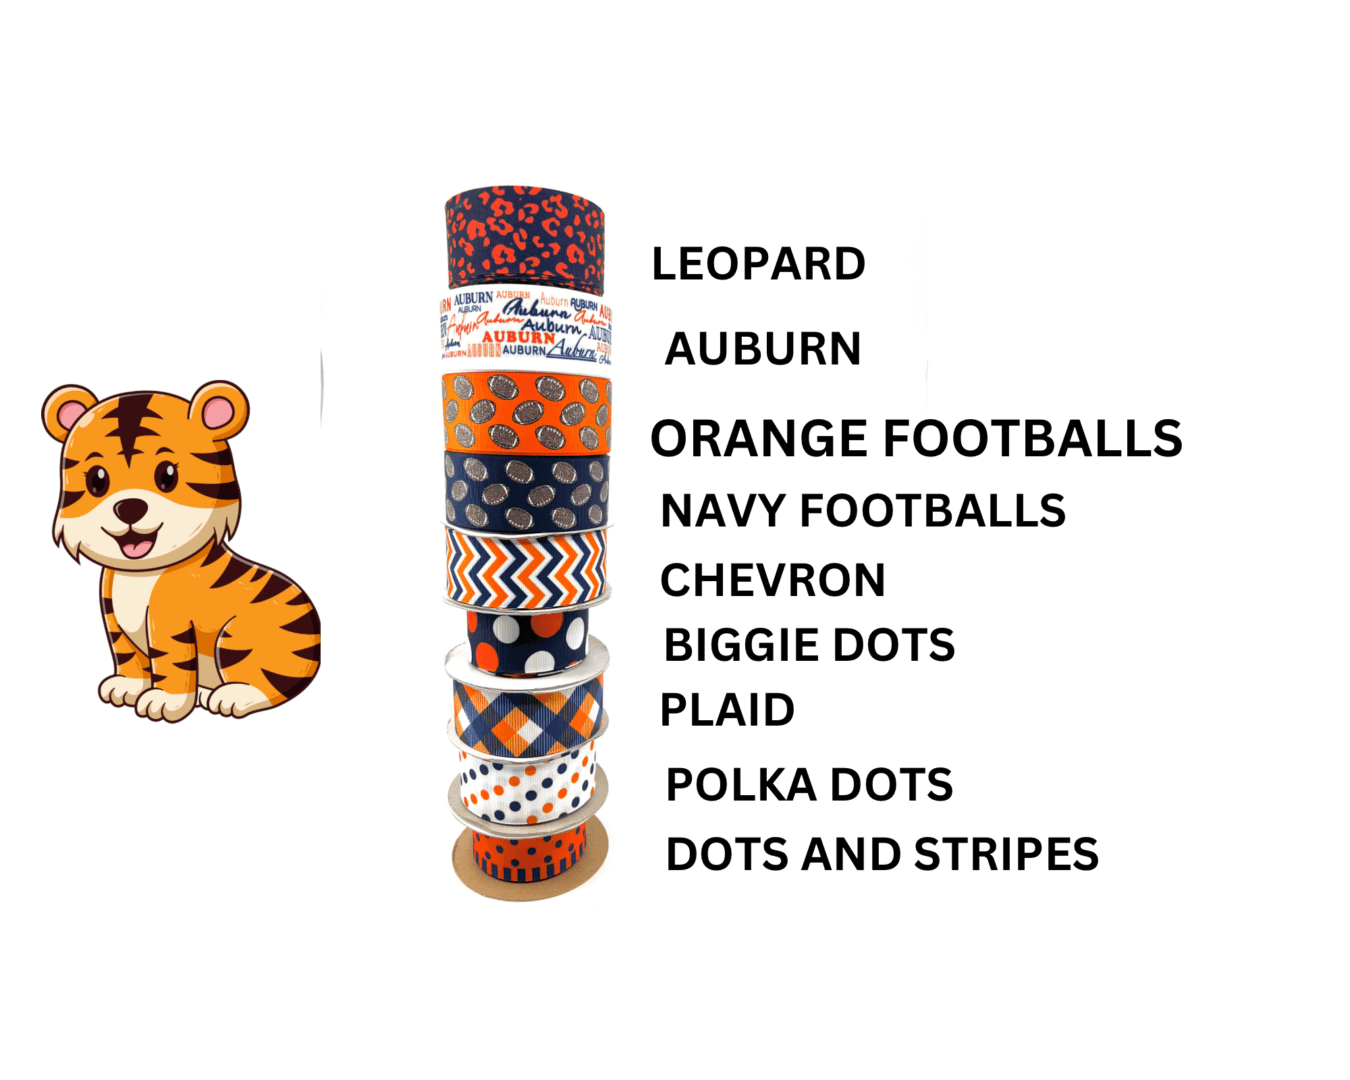 A tiger is shown with many different patterns.